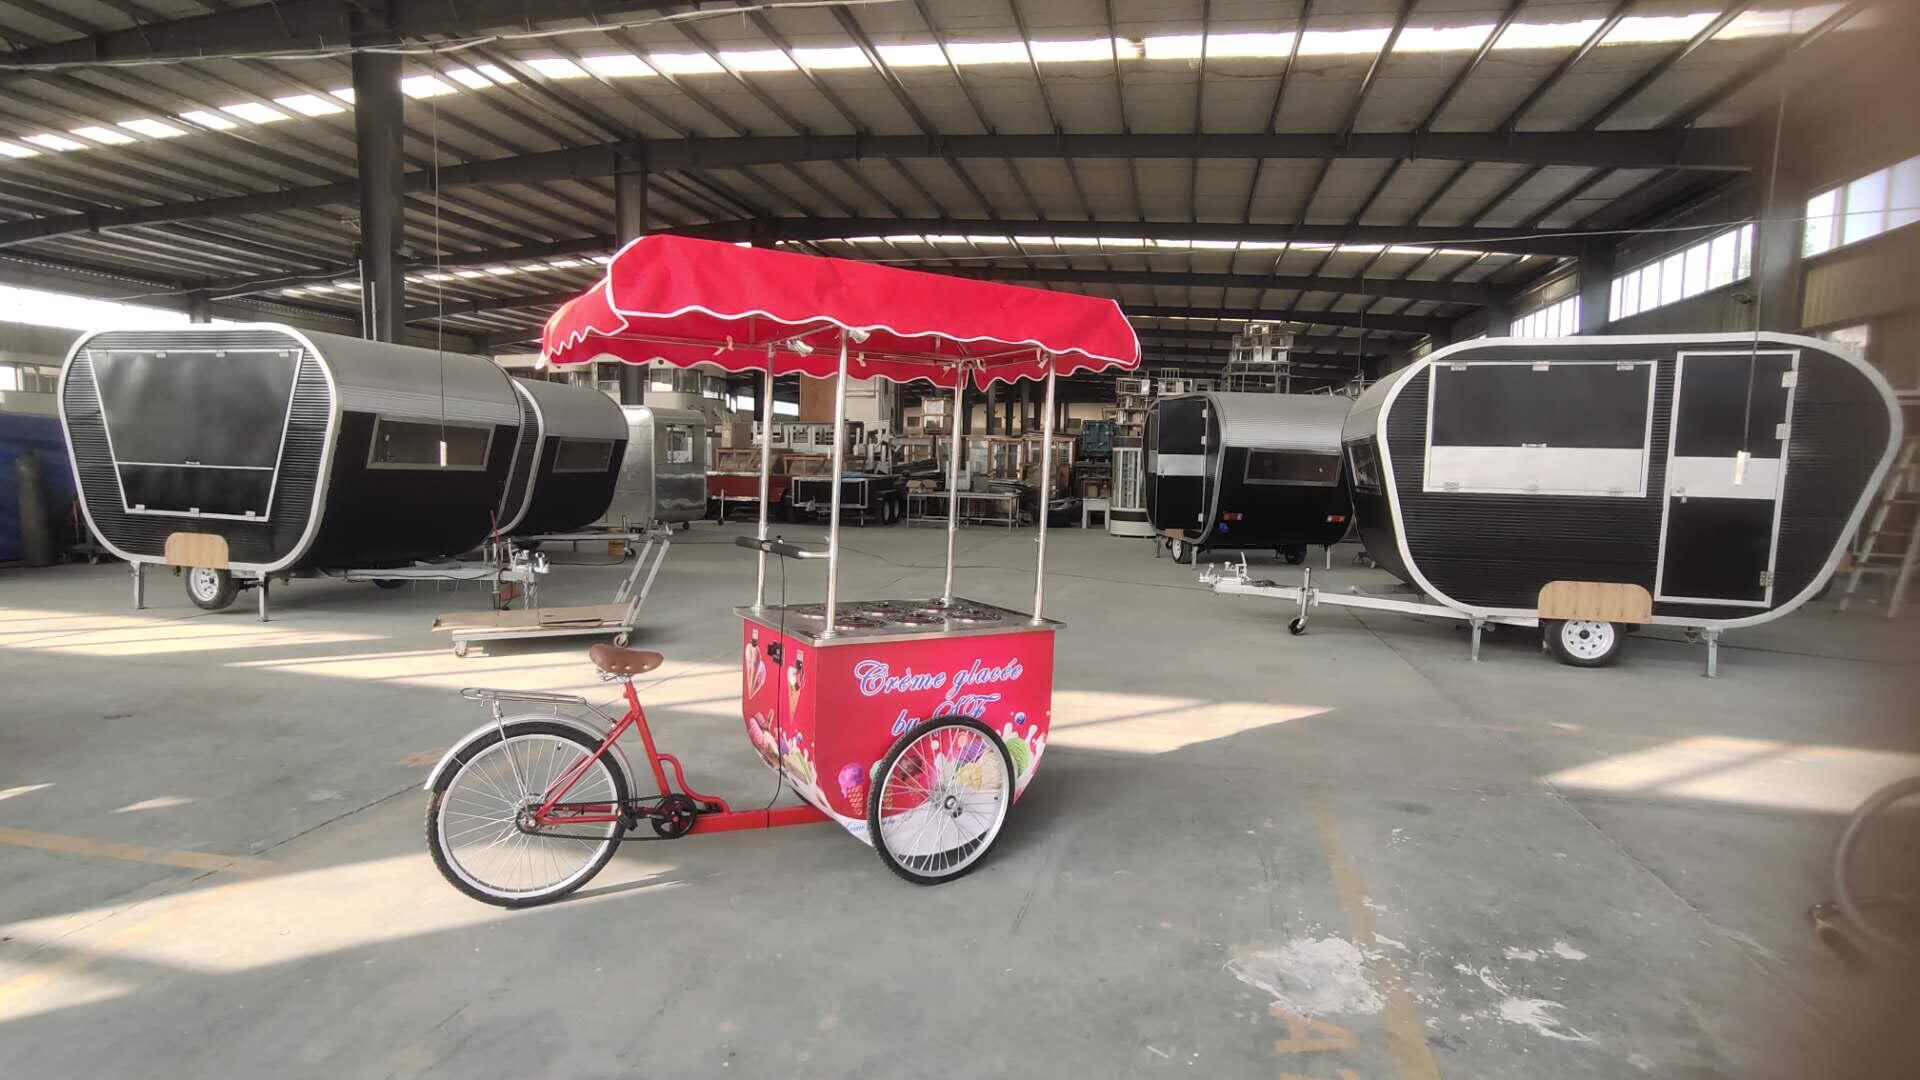 New Tricycle Vending Cart for Ice Cream and Gelato